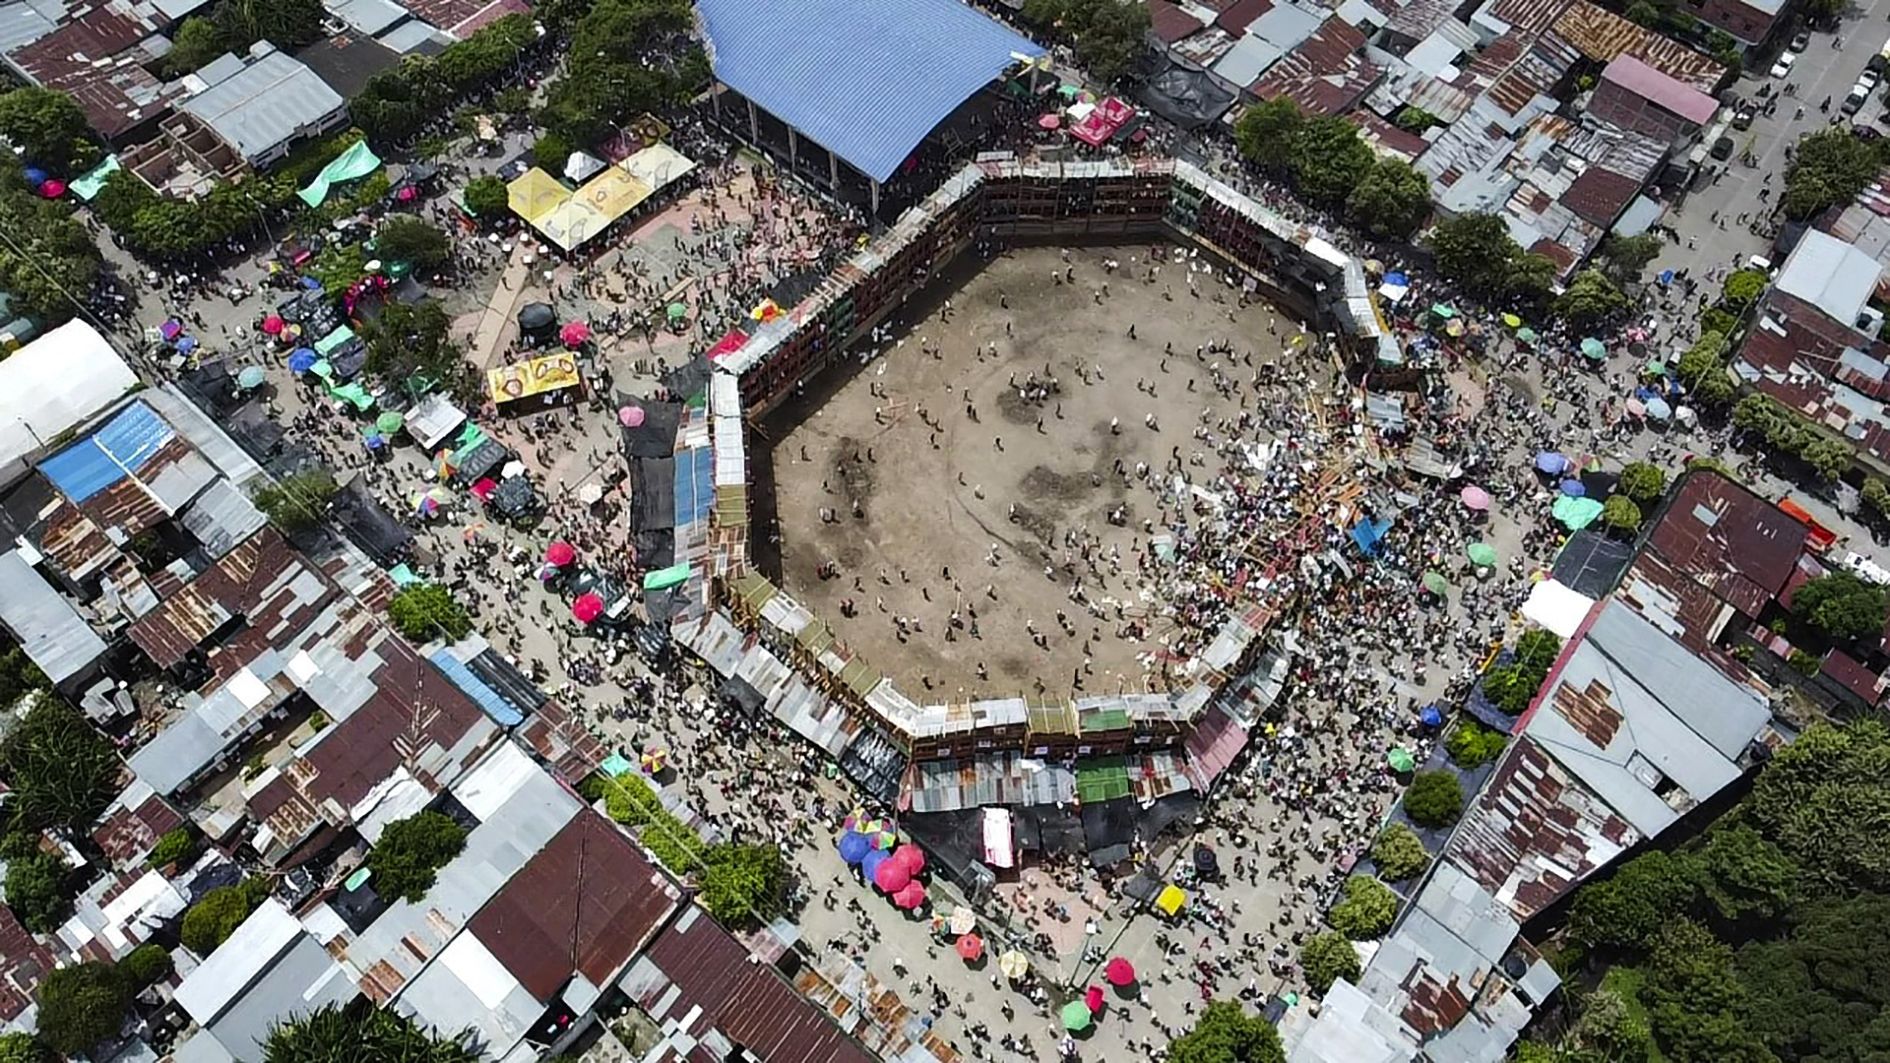 Aerial view of the collapsed grandstand in a bullring in the Colombian municipality of El Espinal, southwest of Bogotá, on June 26, 2022. At least four people were killed and another 30 seriously injured when a full three-story section of wooden stands filled with spectators collapsed, throwing dozens of people to the ground, during a popular event at which members of the public face off with small bulls, officials said.